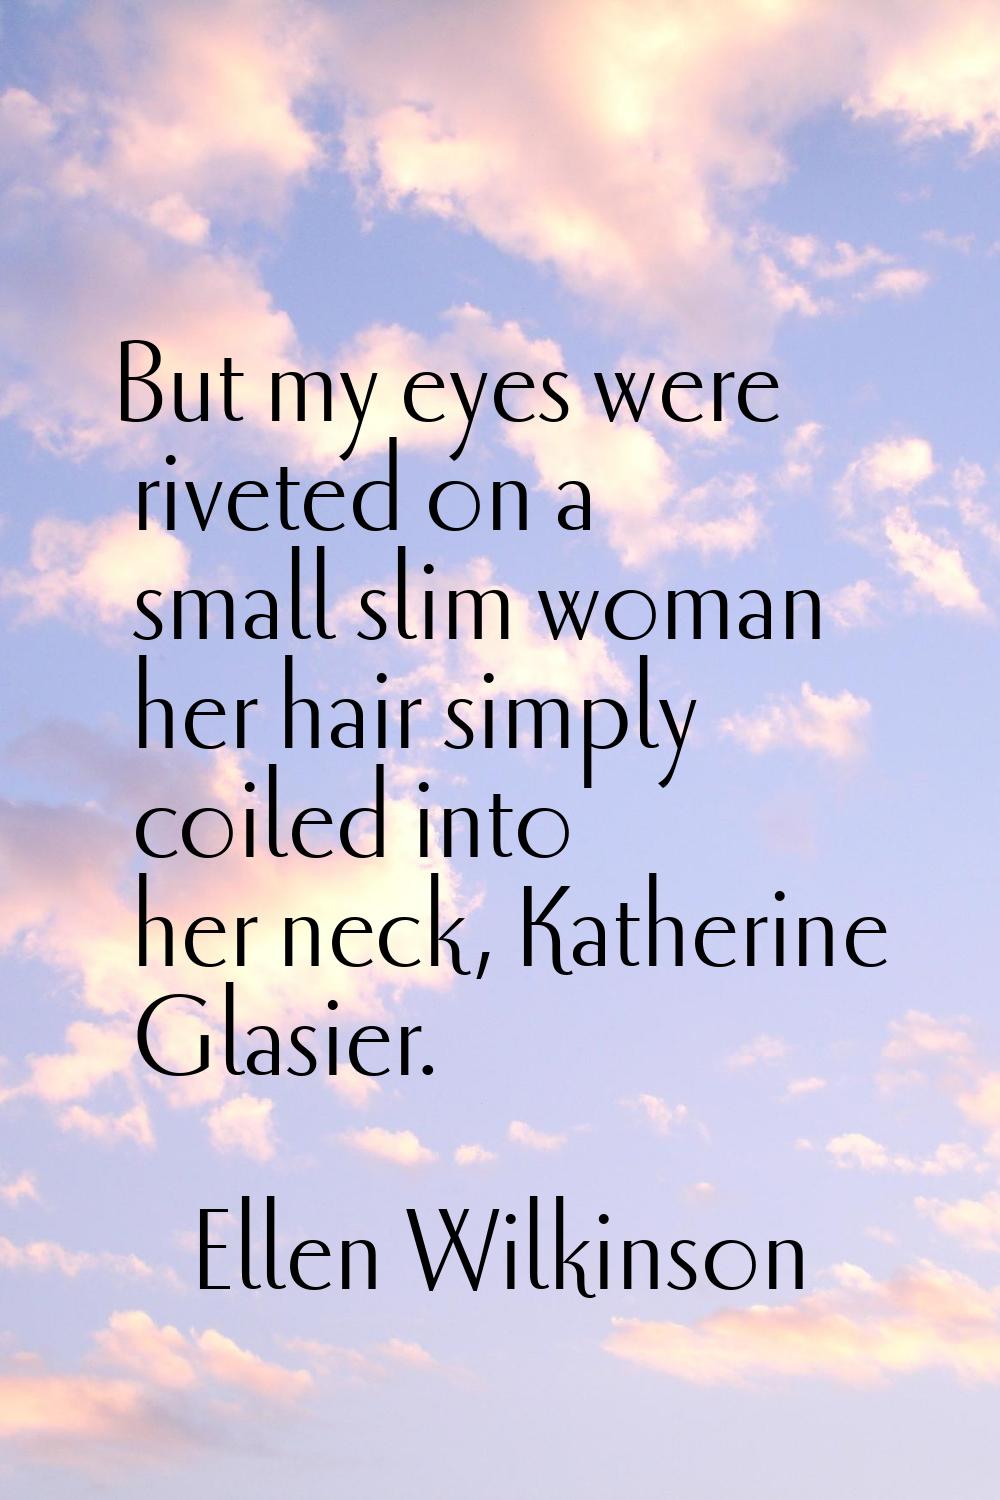 But my eyes were riveted on a small slim woman her hair simply coiled into her neck, Katherine Glas